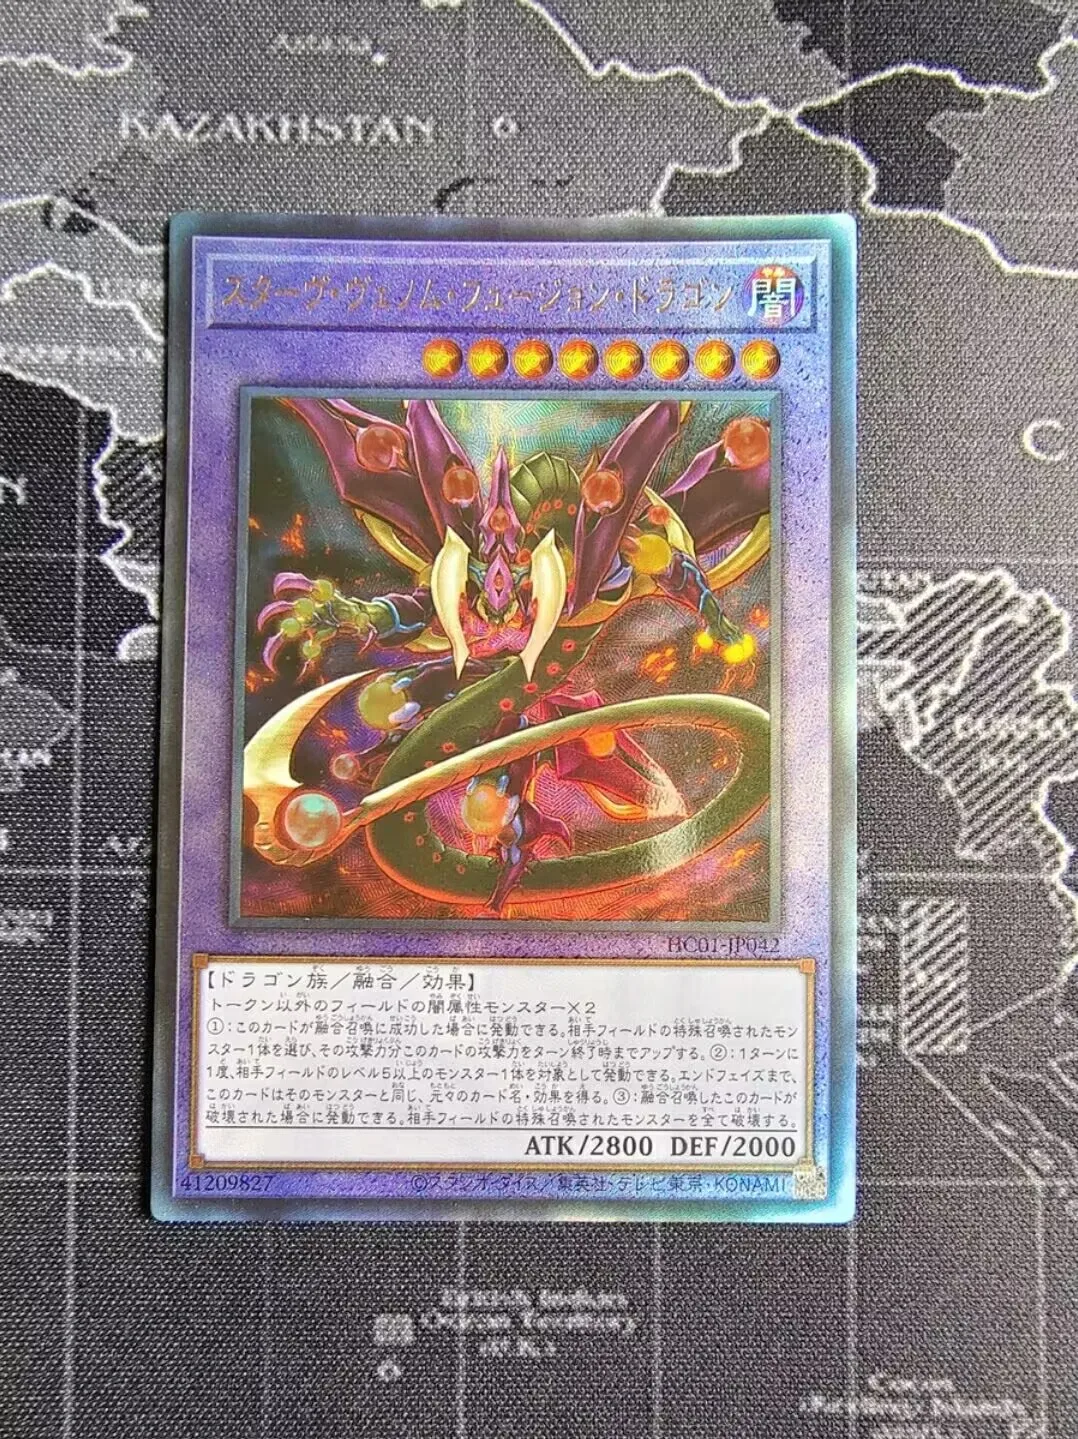 

HC01-JP042 - Yugioh - Japanese - Starving Venom Fusion Dragon - Ultimate Collection Mint Card